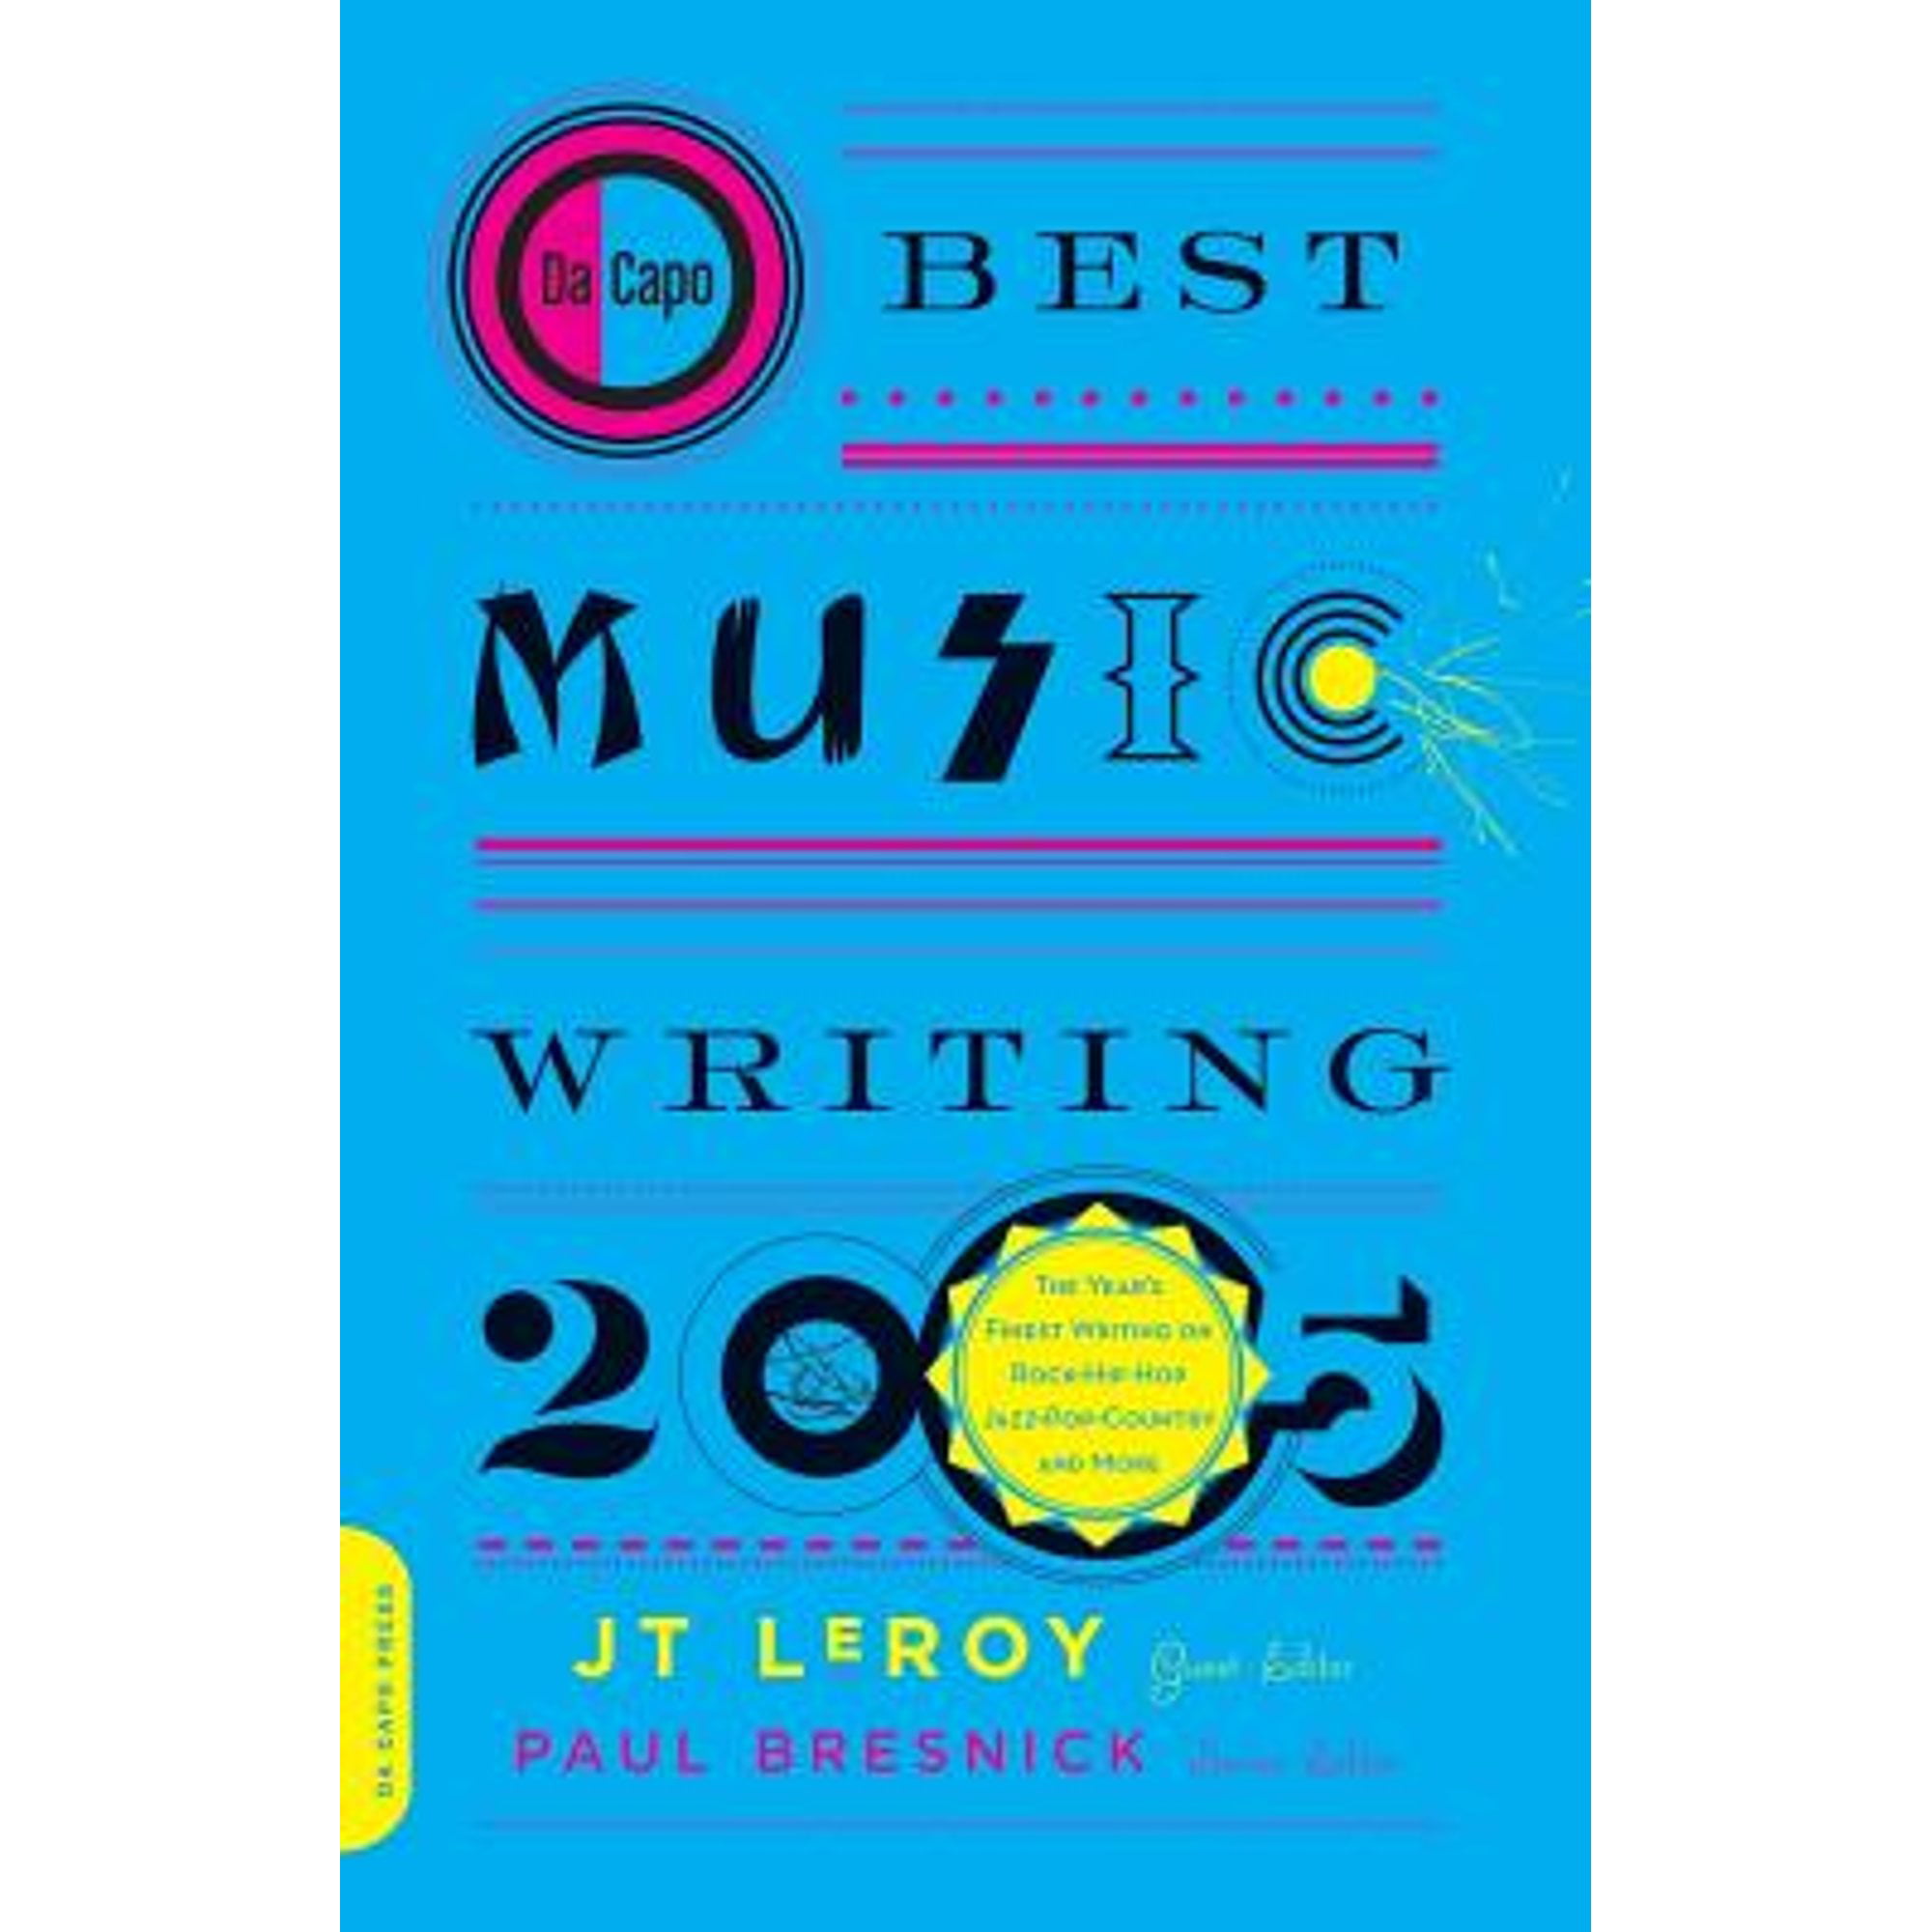 Pre-Owned Da Capo Best Music Writing 2005: The Year's Finest Writing on Rock, Hip-Hop, Jazz, Pop, (Paperback 9780306814464) by J T Leroy, Paul Bresnick